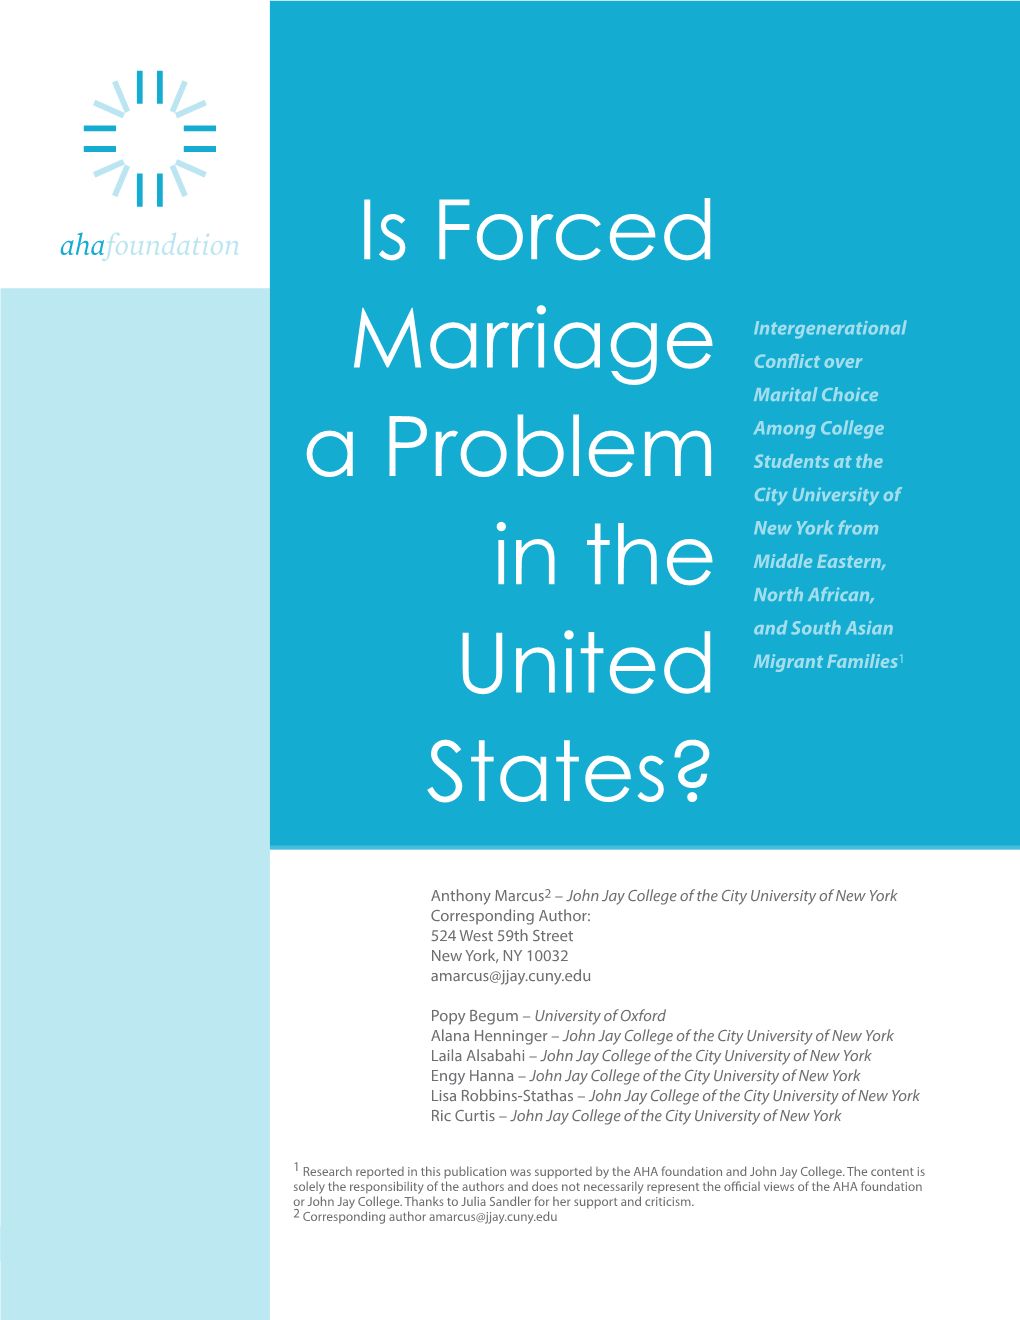 Is Forced Marriage a Problem in the United States? Political and Social Issue (Anitha and Gill 2009)